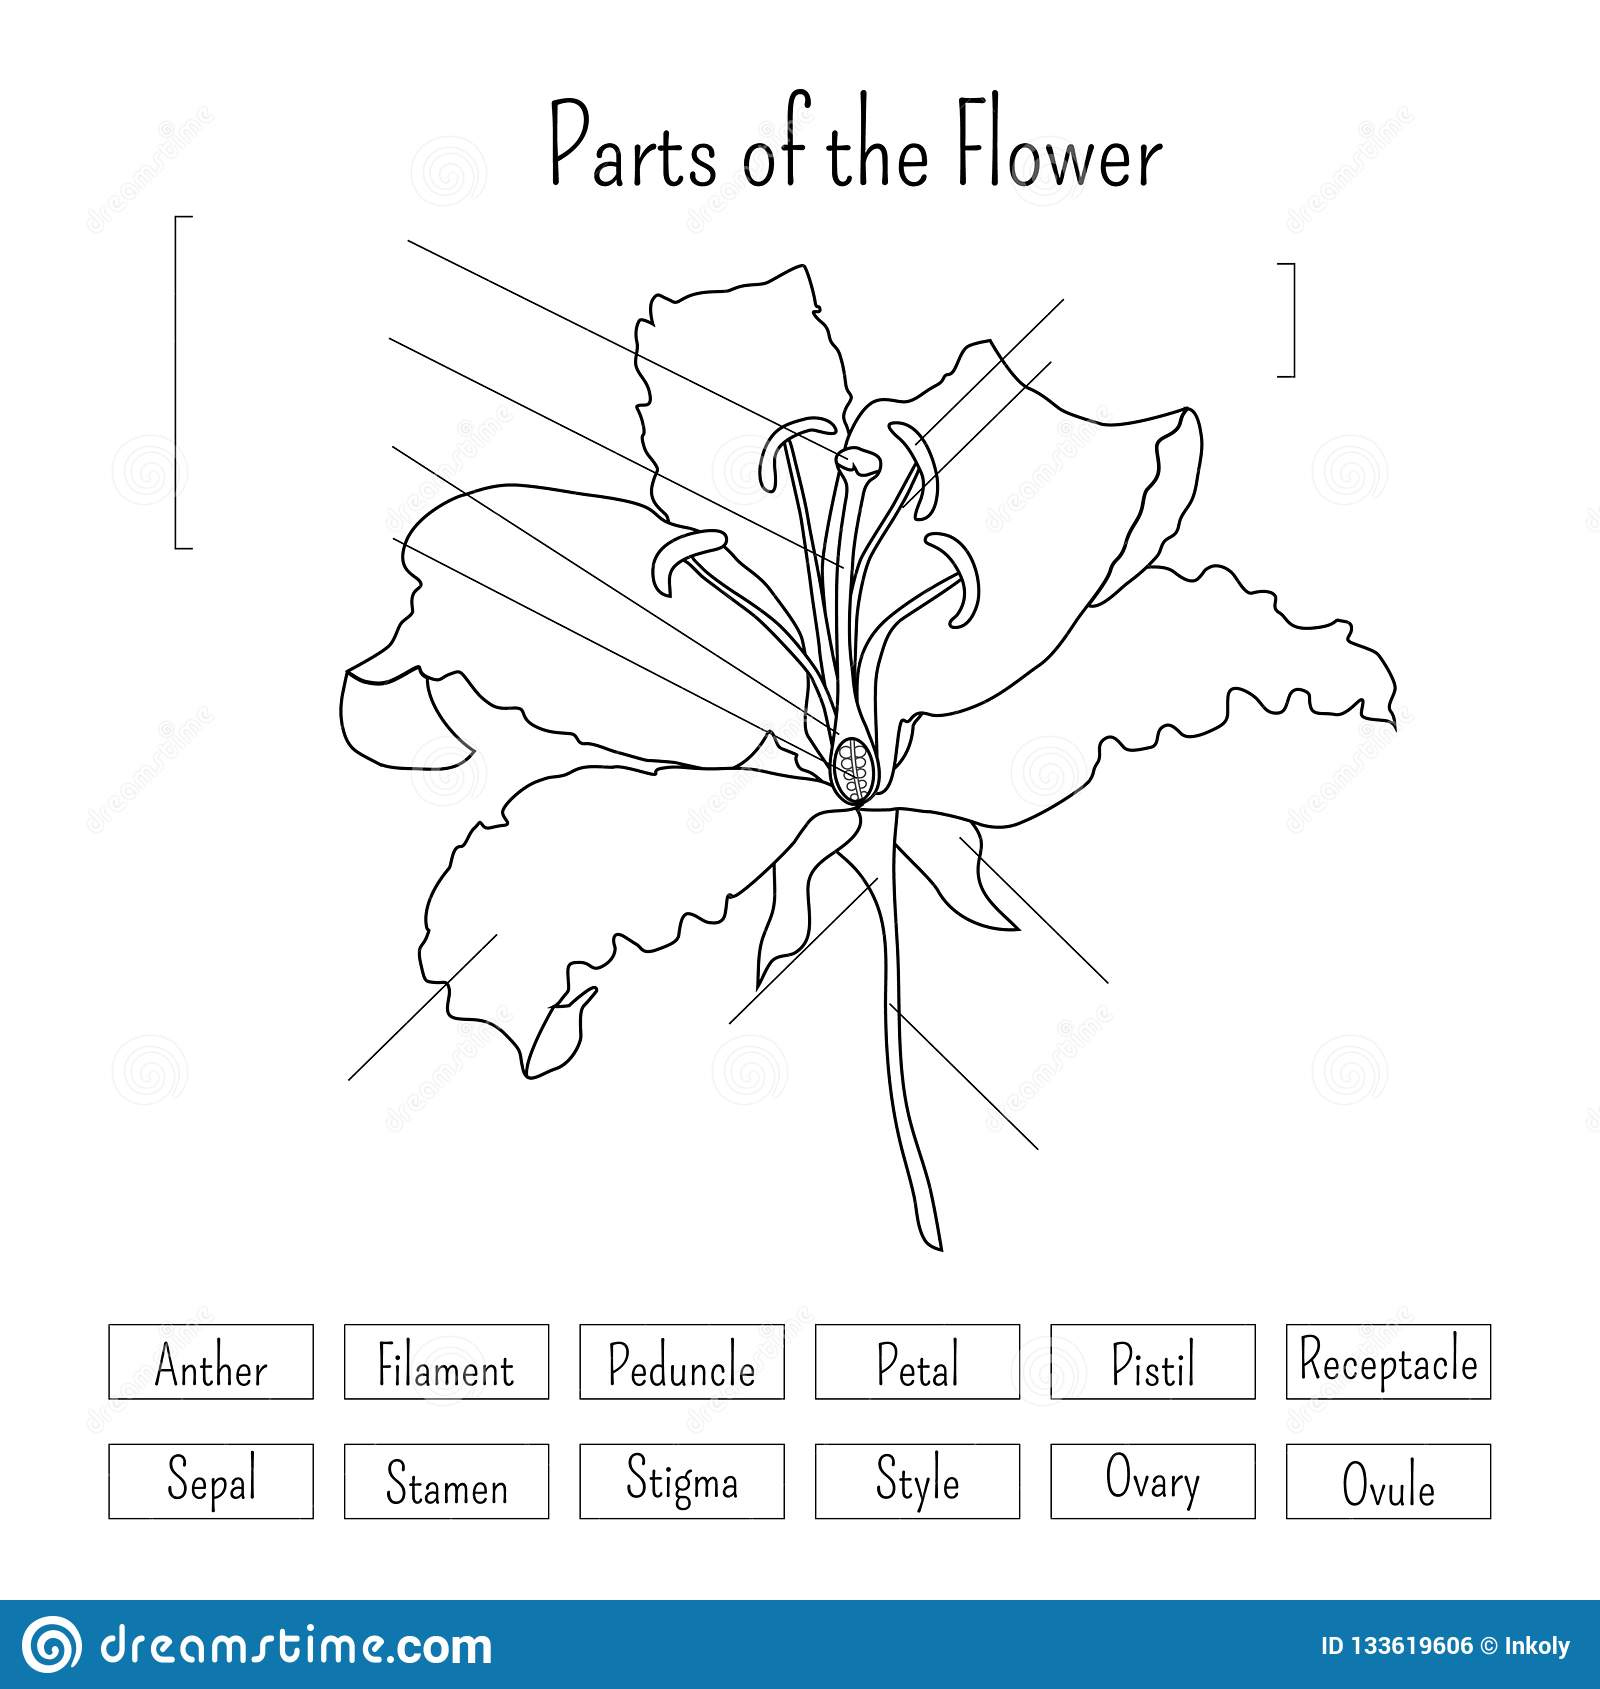 Parts Of The Flower Worksheet In Black And White Lily Flower Anatomy 